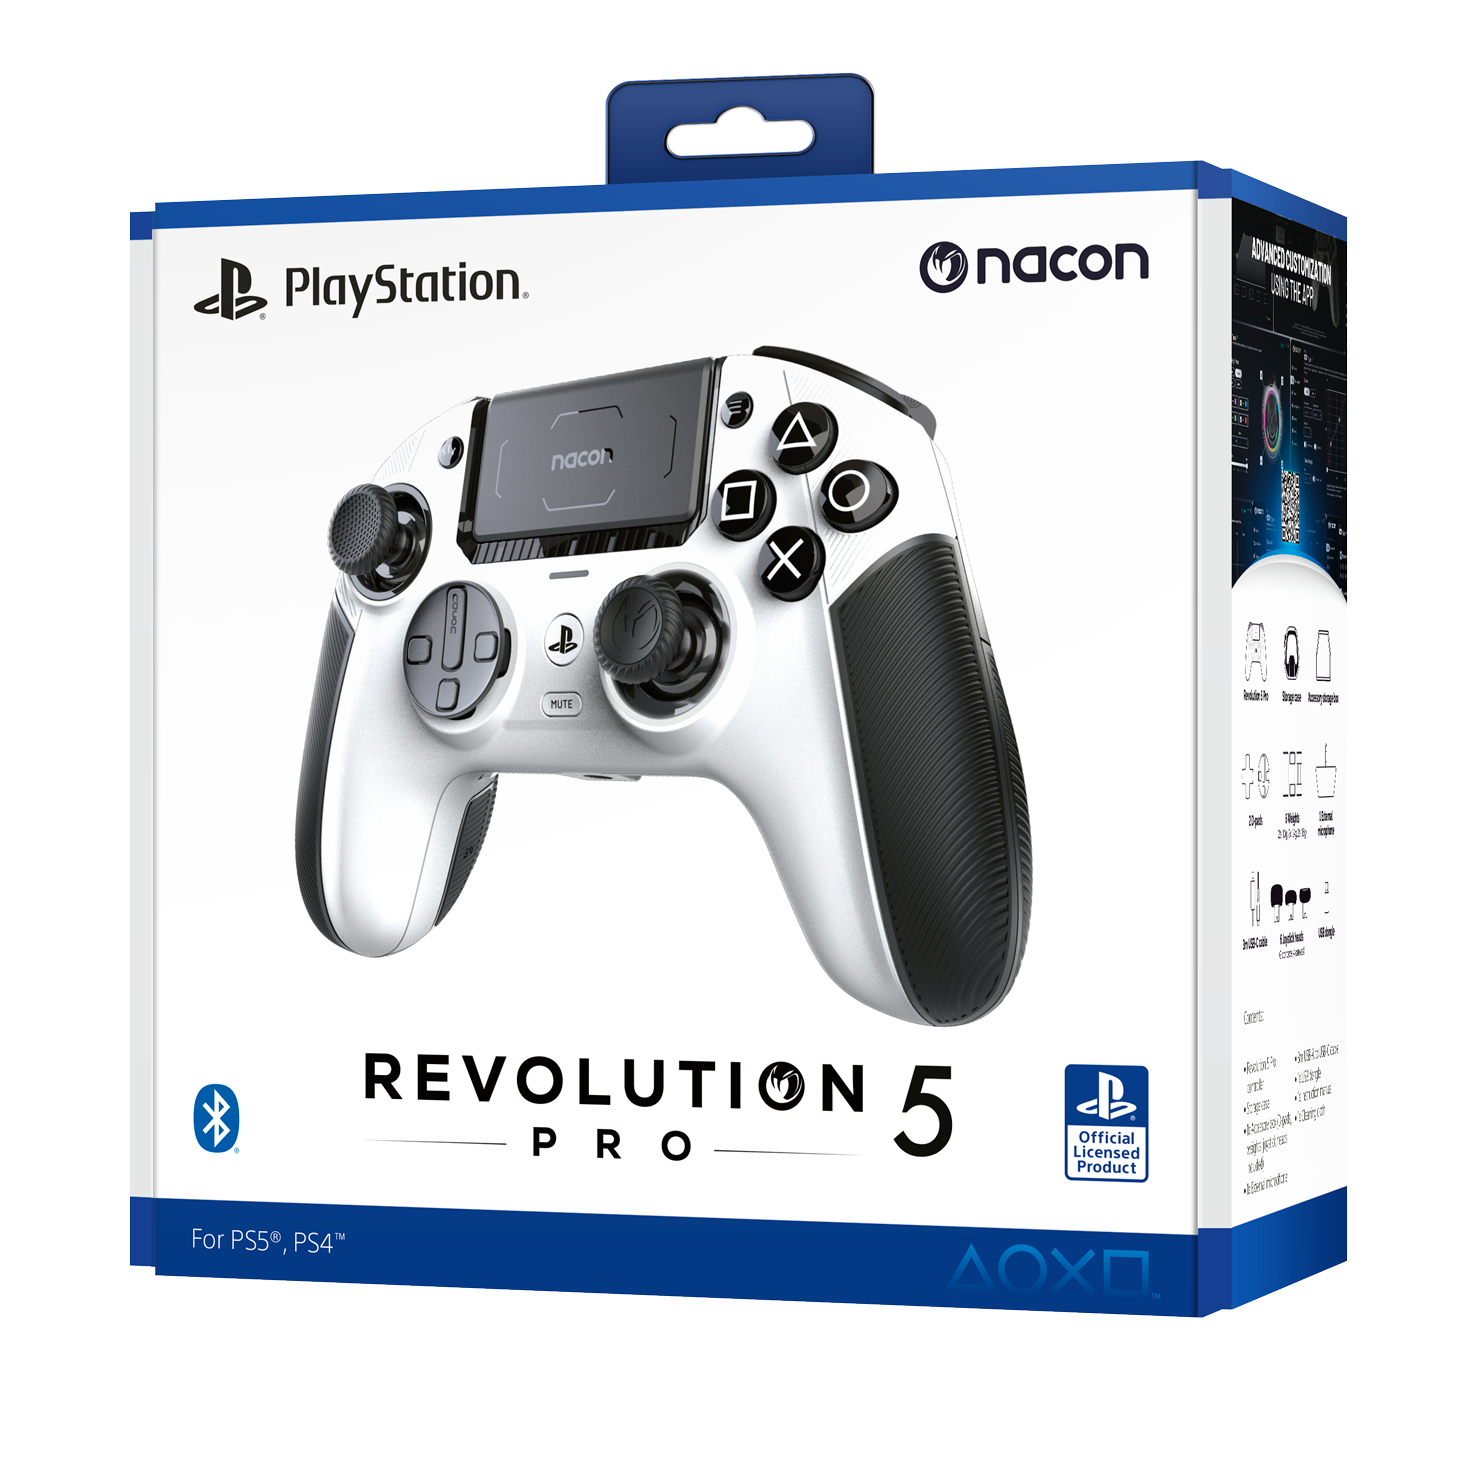 Nacon's Revolution 5 Pro for Playstation: Is it worth it?